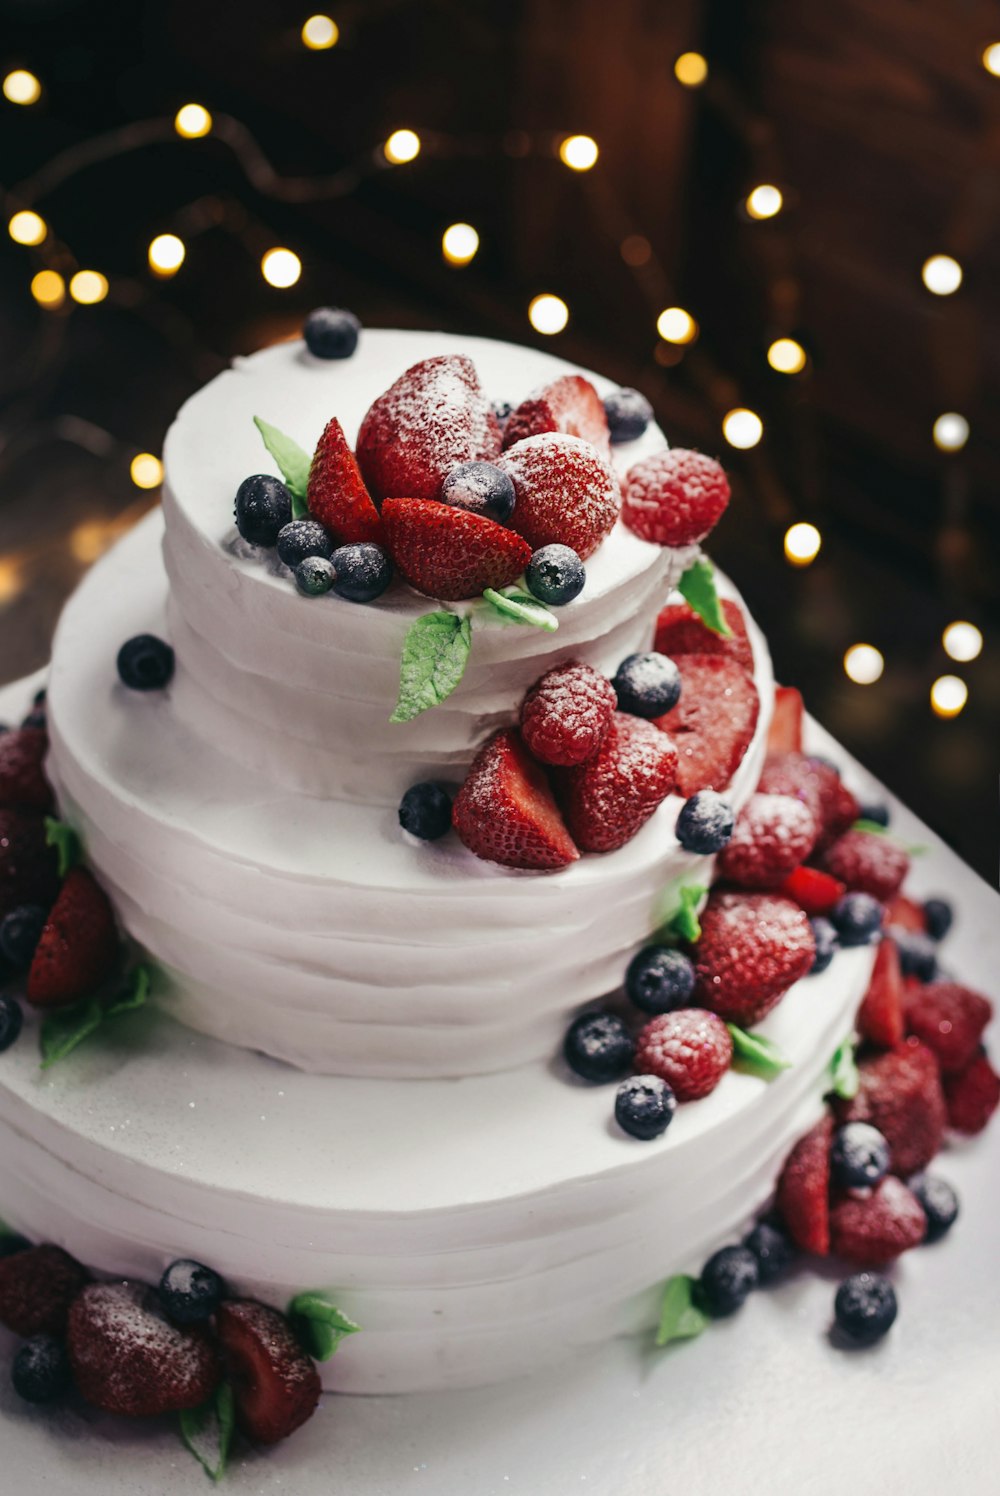 750+ 20Th Birthday Cake Pictures [HD] | Download Free Images on ...